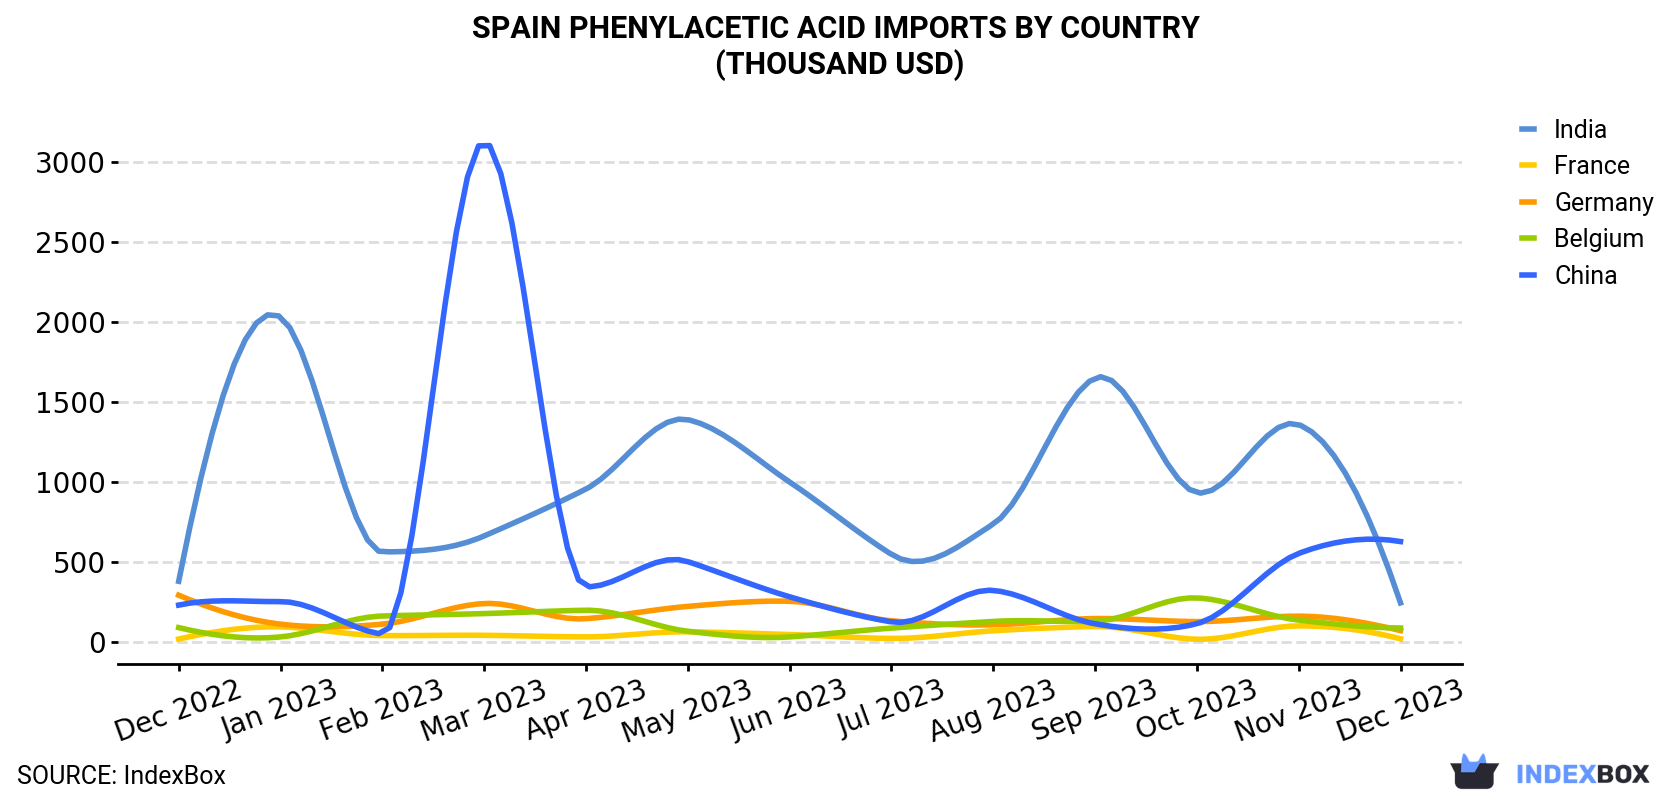 Spain Phenylacetic Acid Imports By Country (Thousand USD)